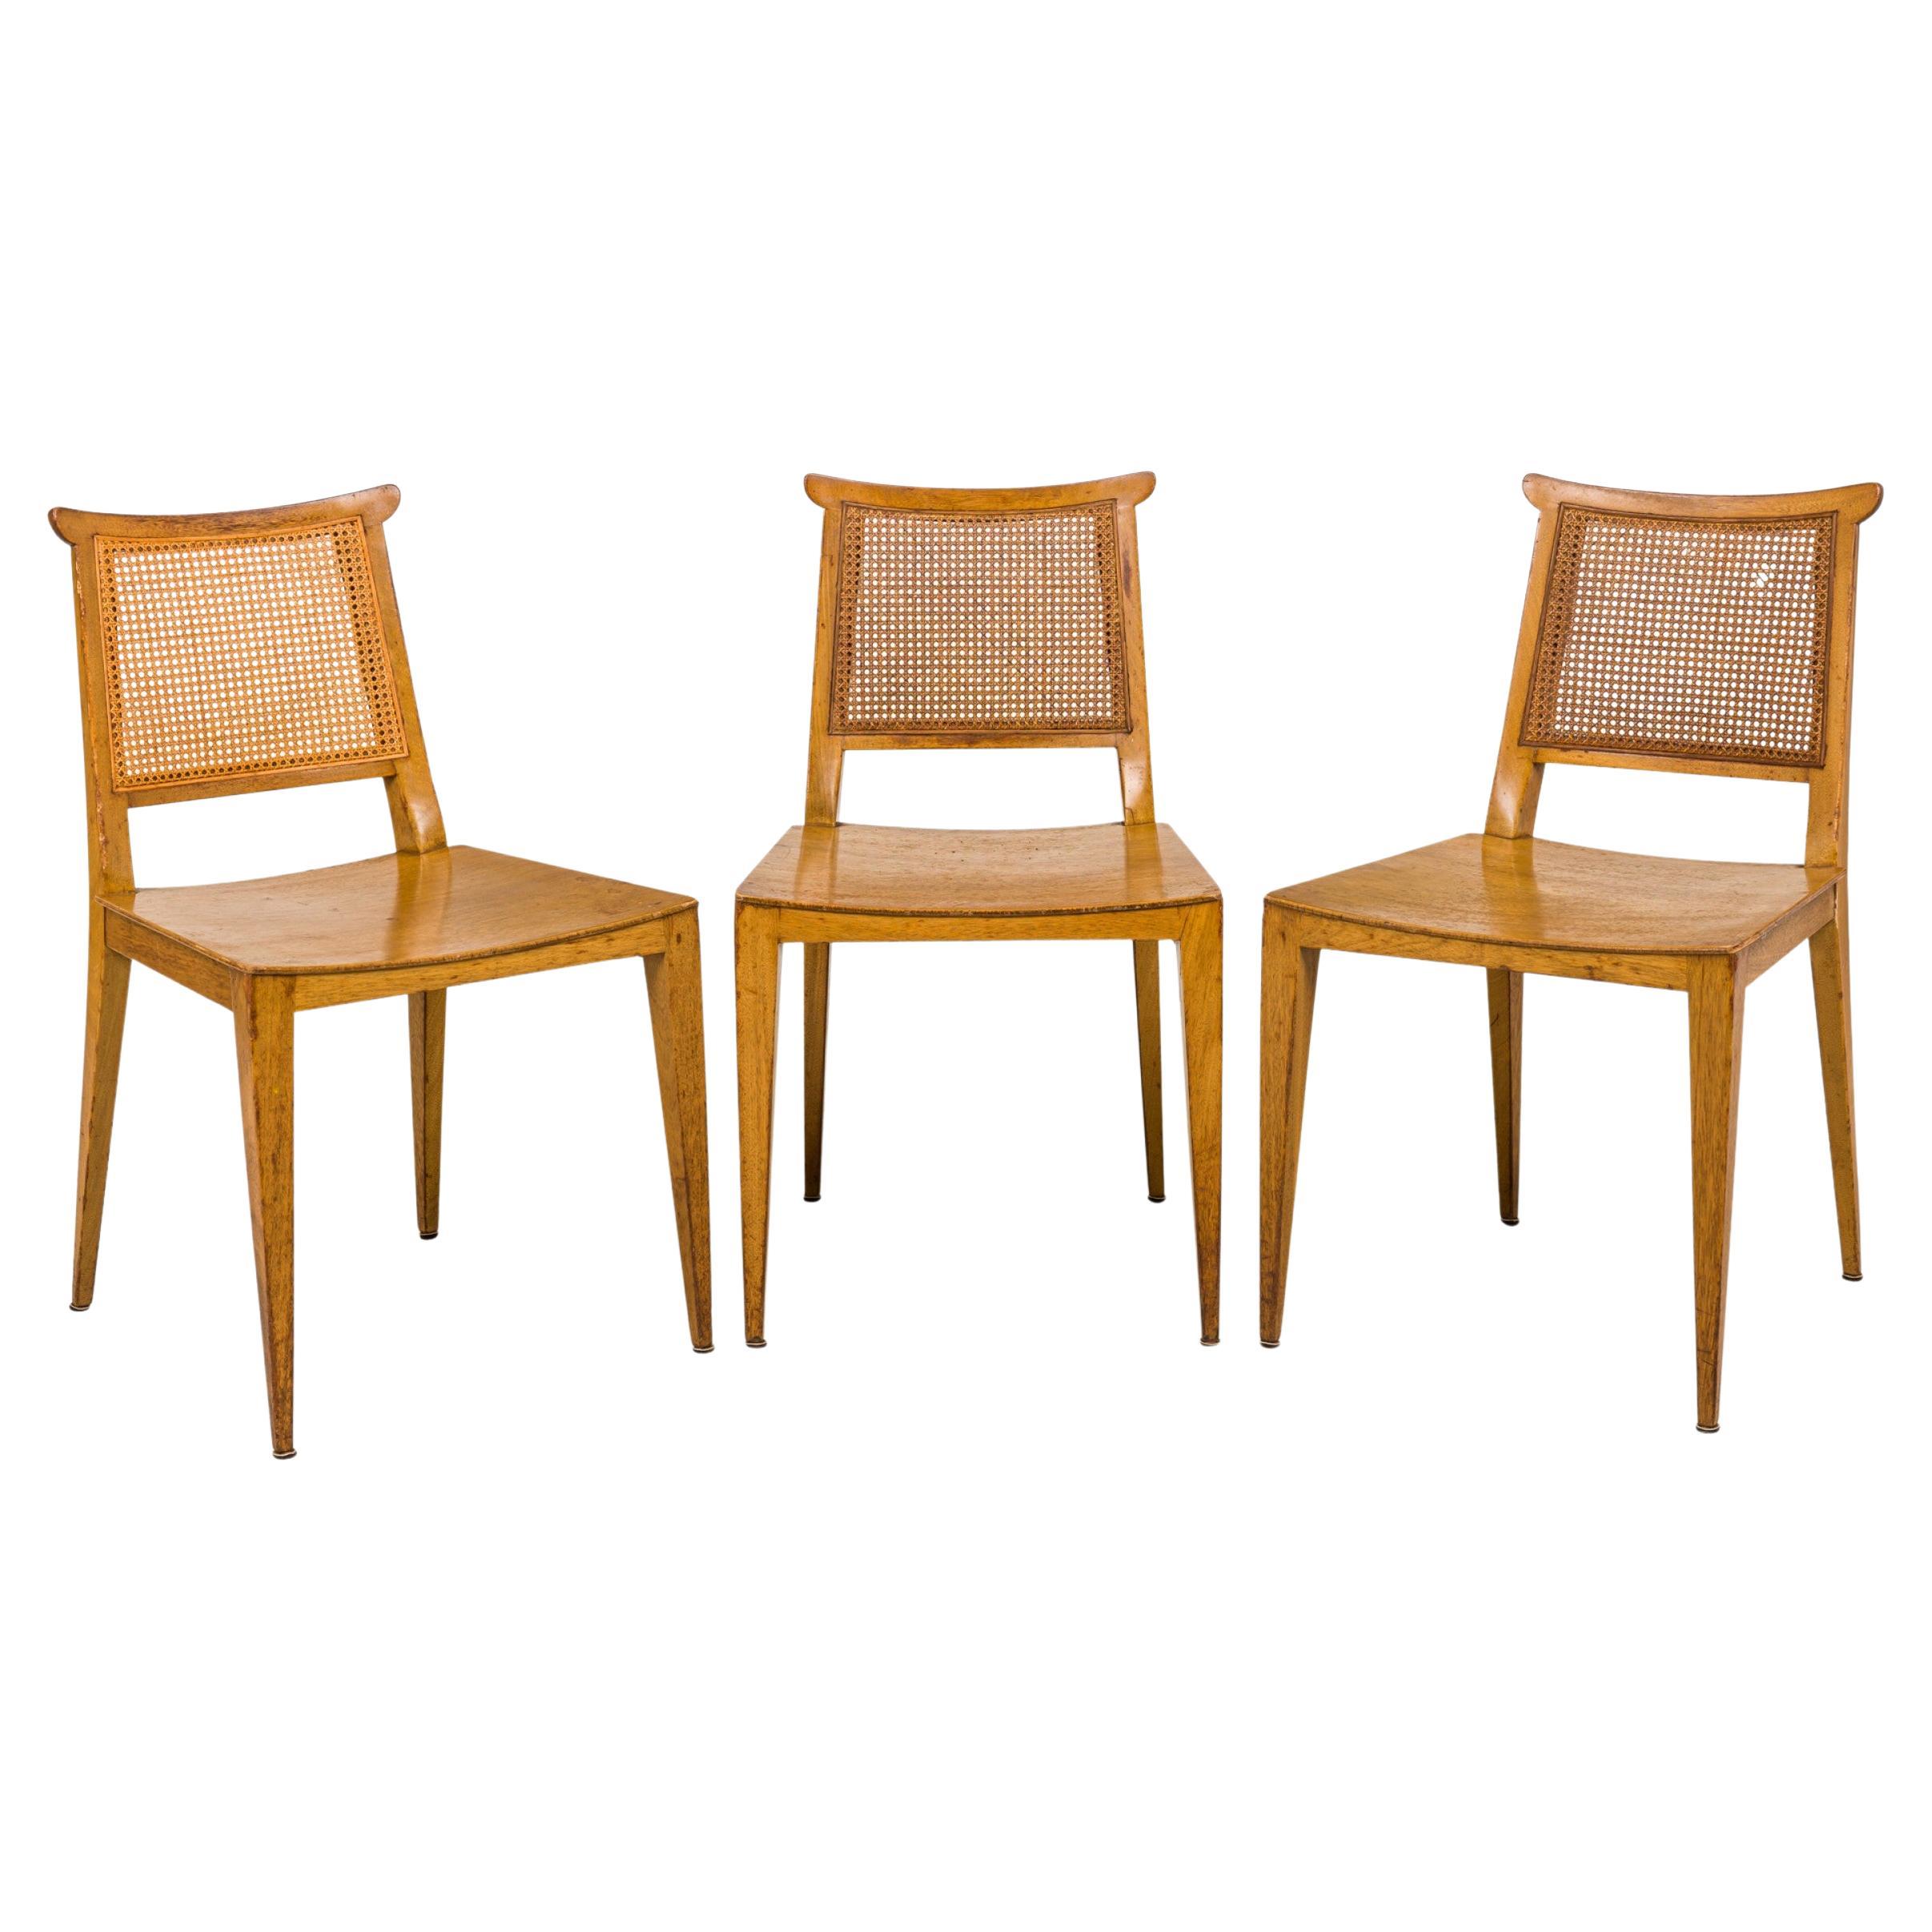 Set of 4 Edward Wormley for Dunbar Caned Back Light Wooden Side Chairs